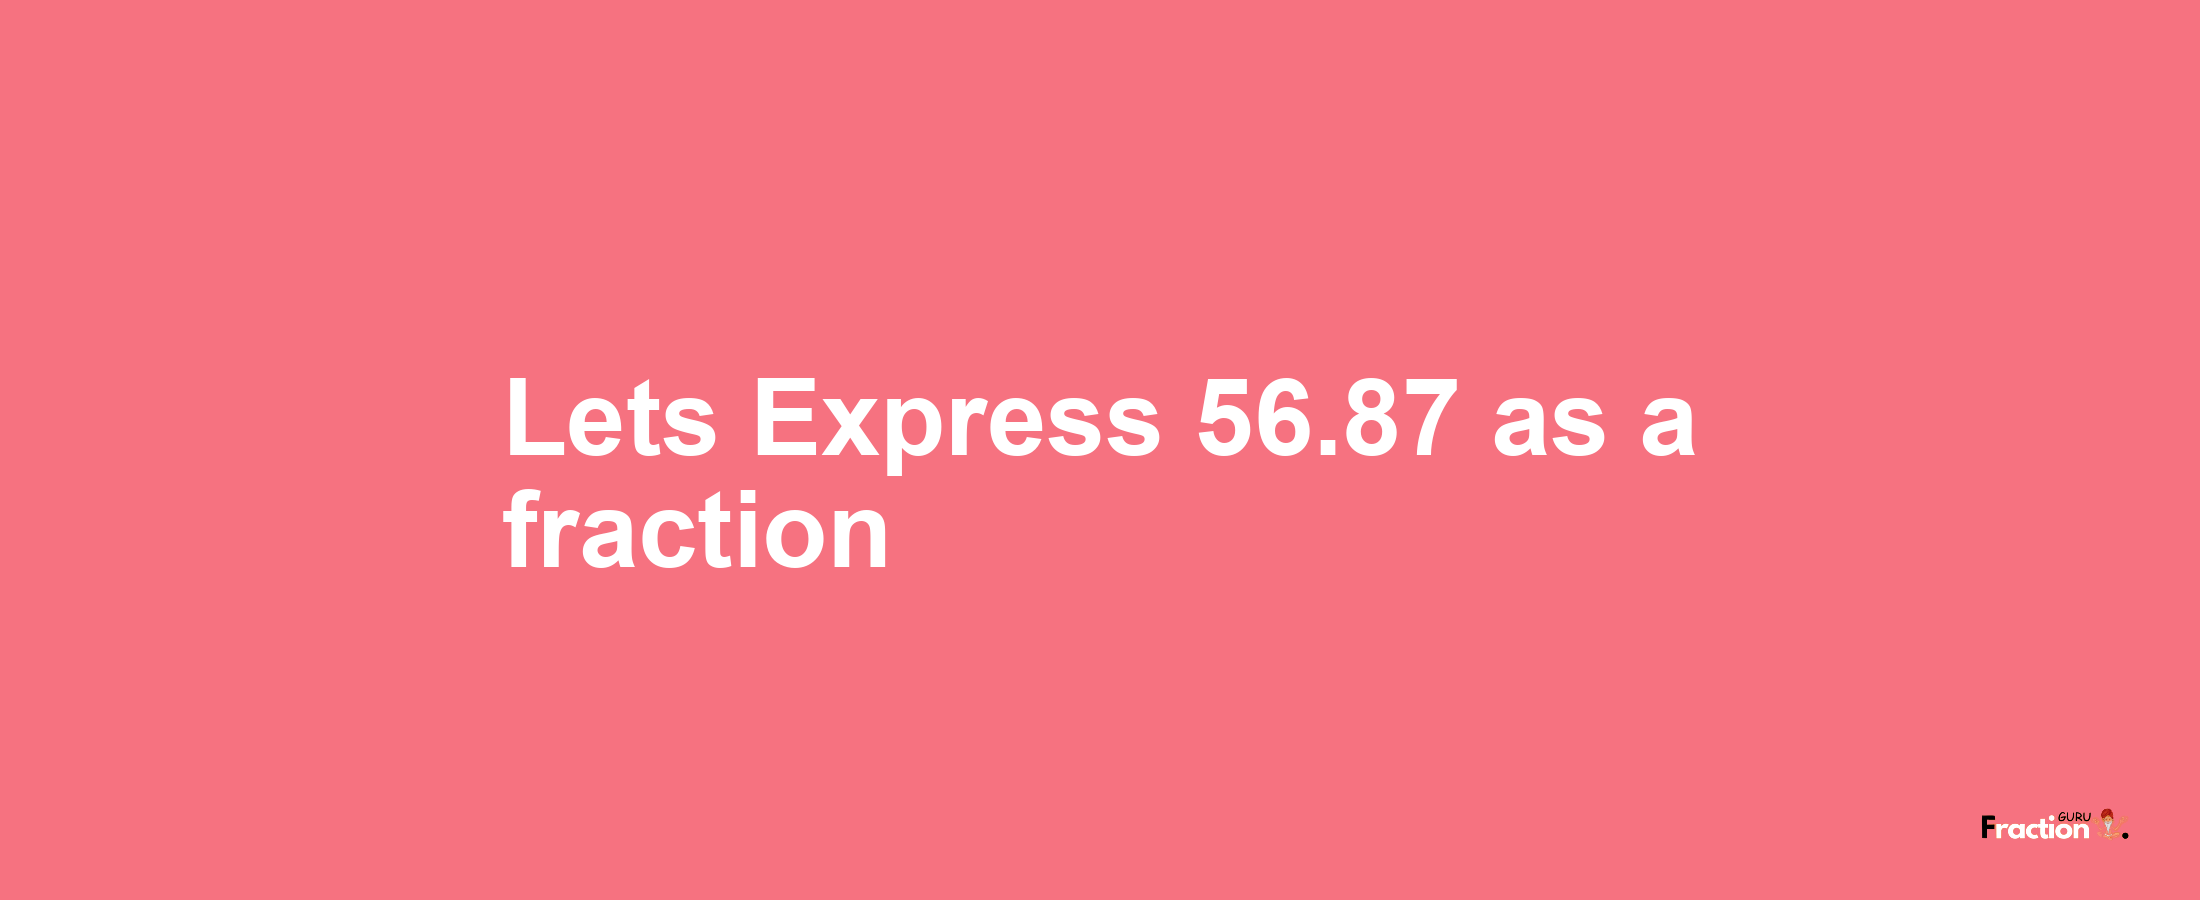 Lets Express 56.87 as afraction